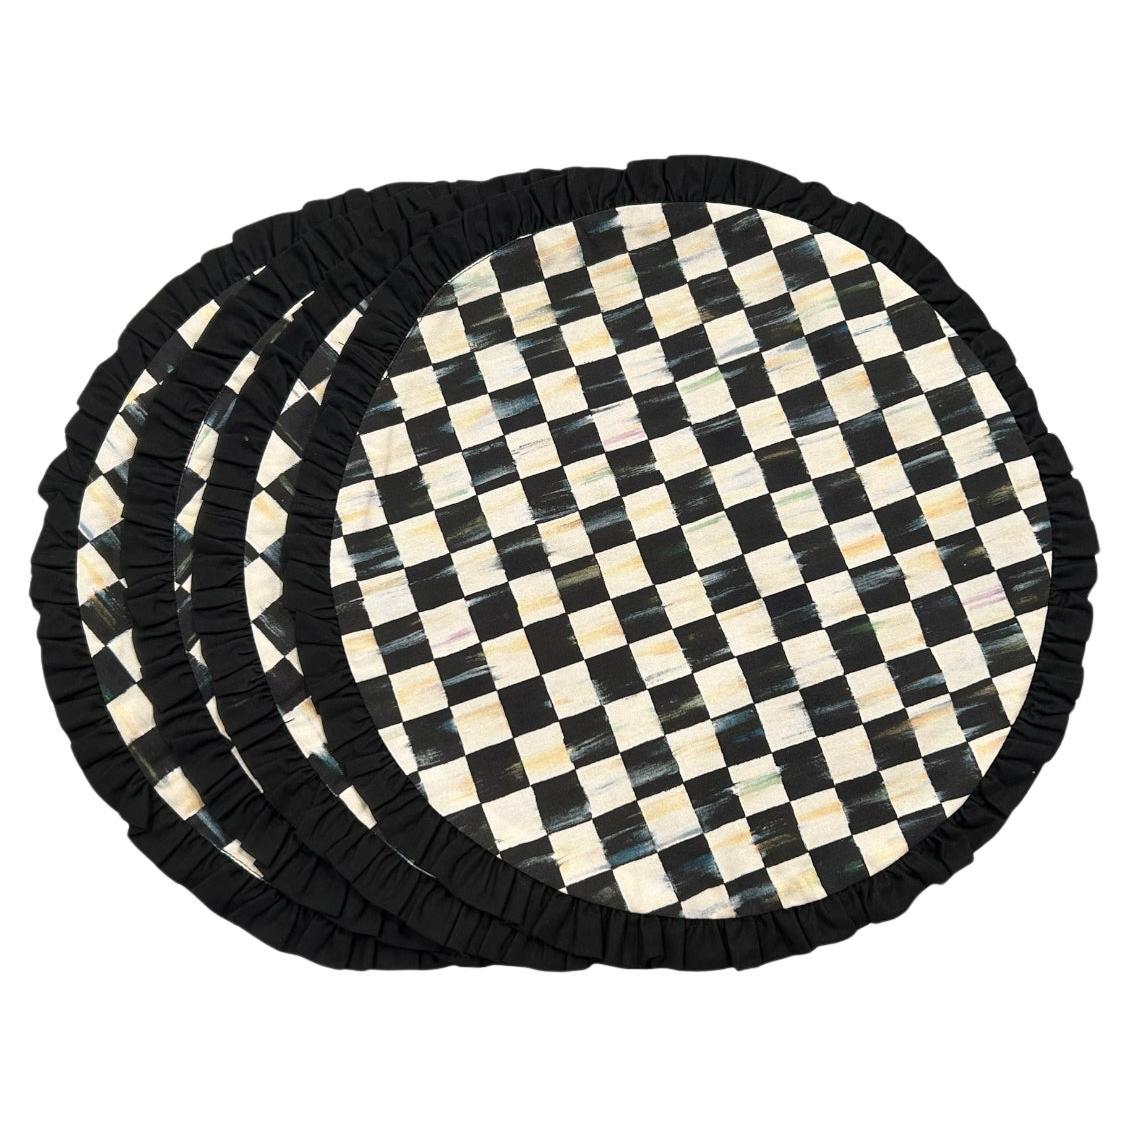 Vintage MacKenzie-Childs “Courtly Check” Round Placemats (Set of 4) For Sale